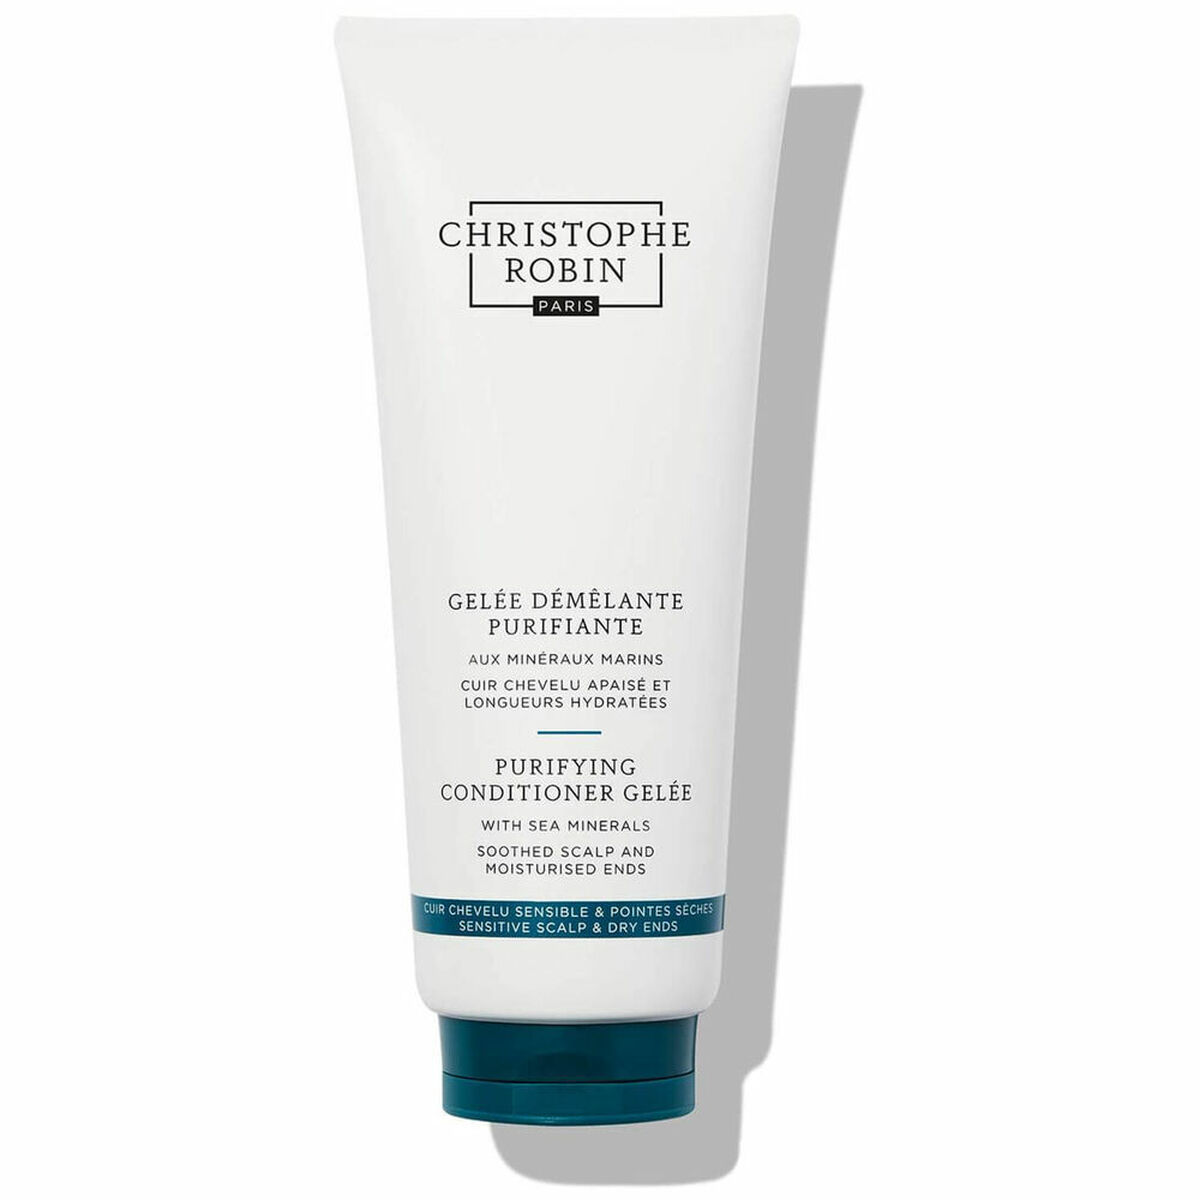 Balsam Christophe Robin Purifying Conditioner Gelee (200 ml)